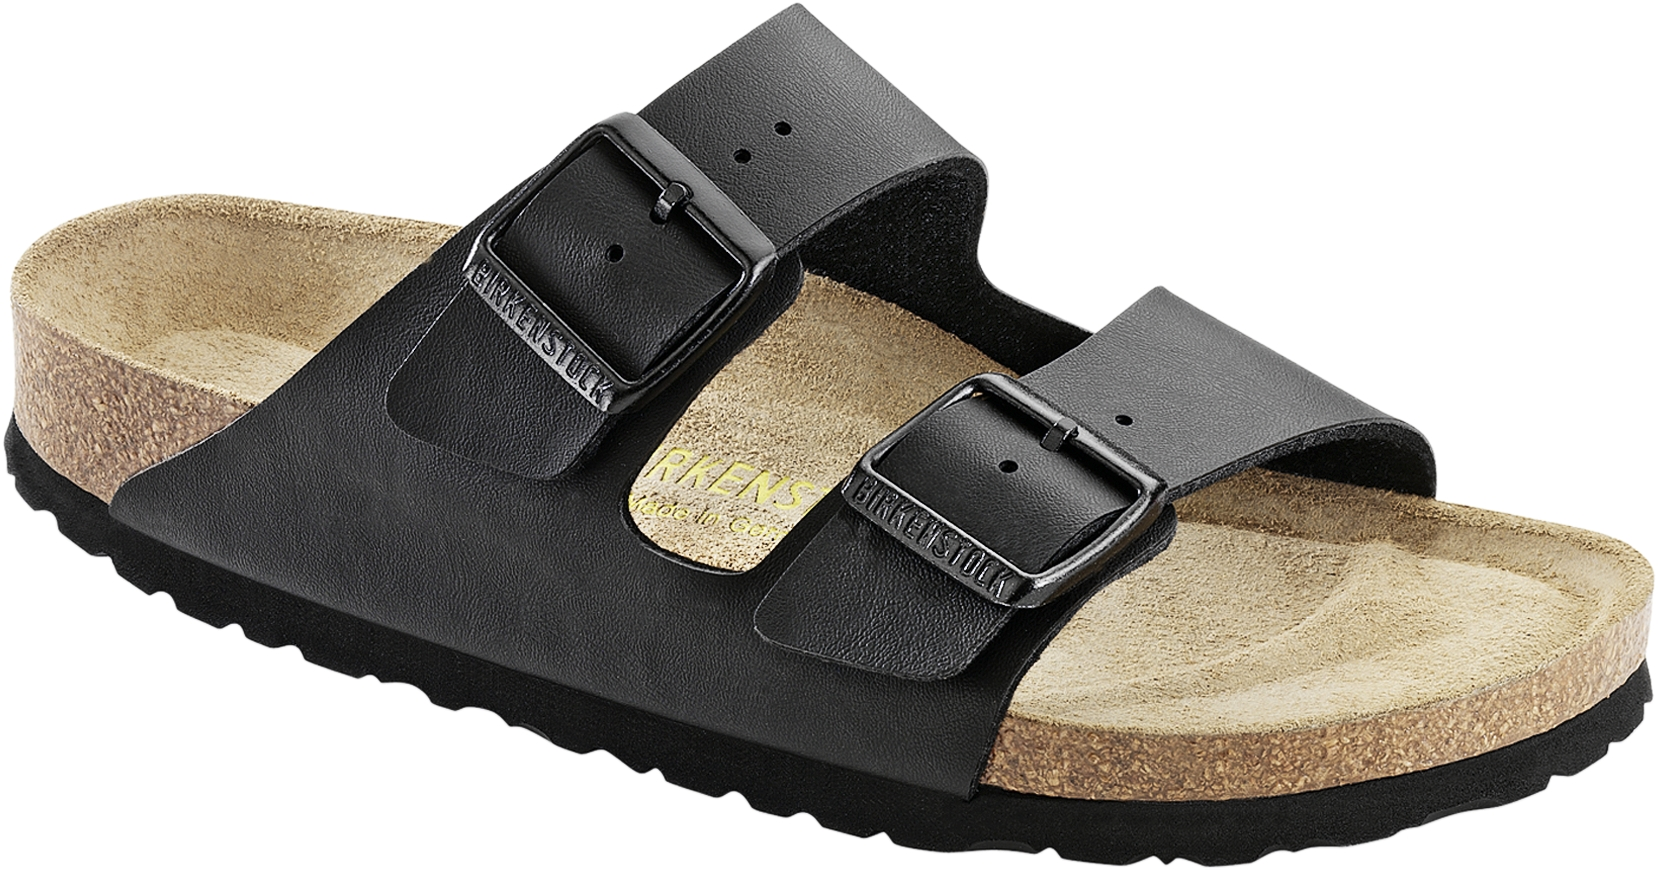 Why Birkenstock Slippers Are the Ultimate Comfort Footwear 3 - whitechaco.com